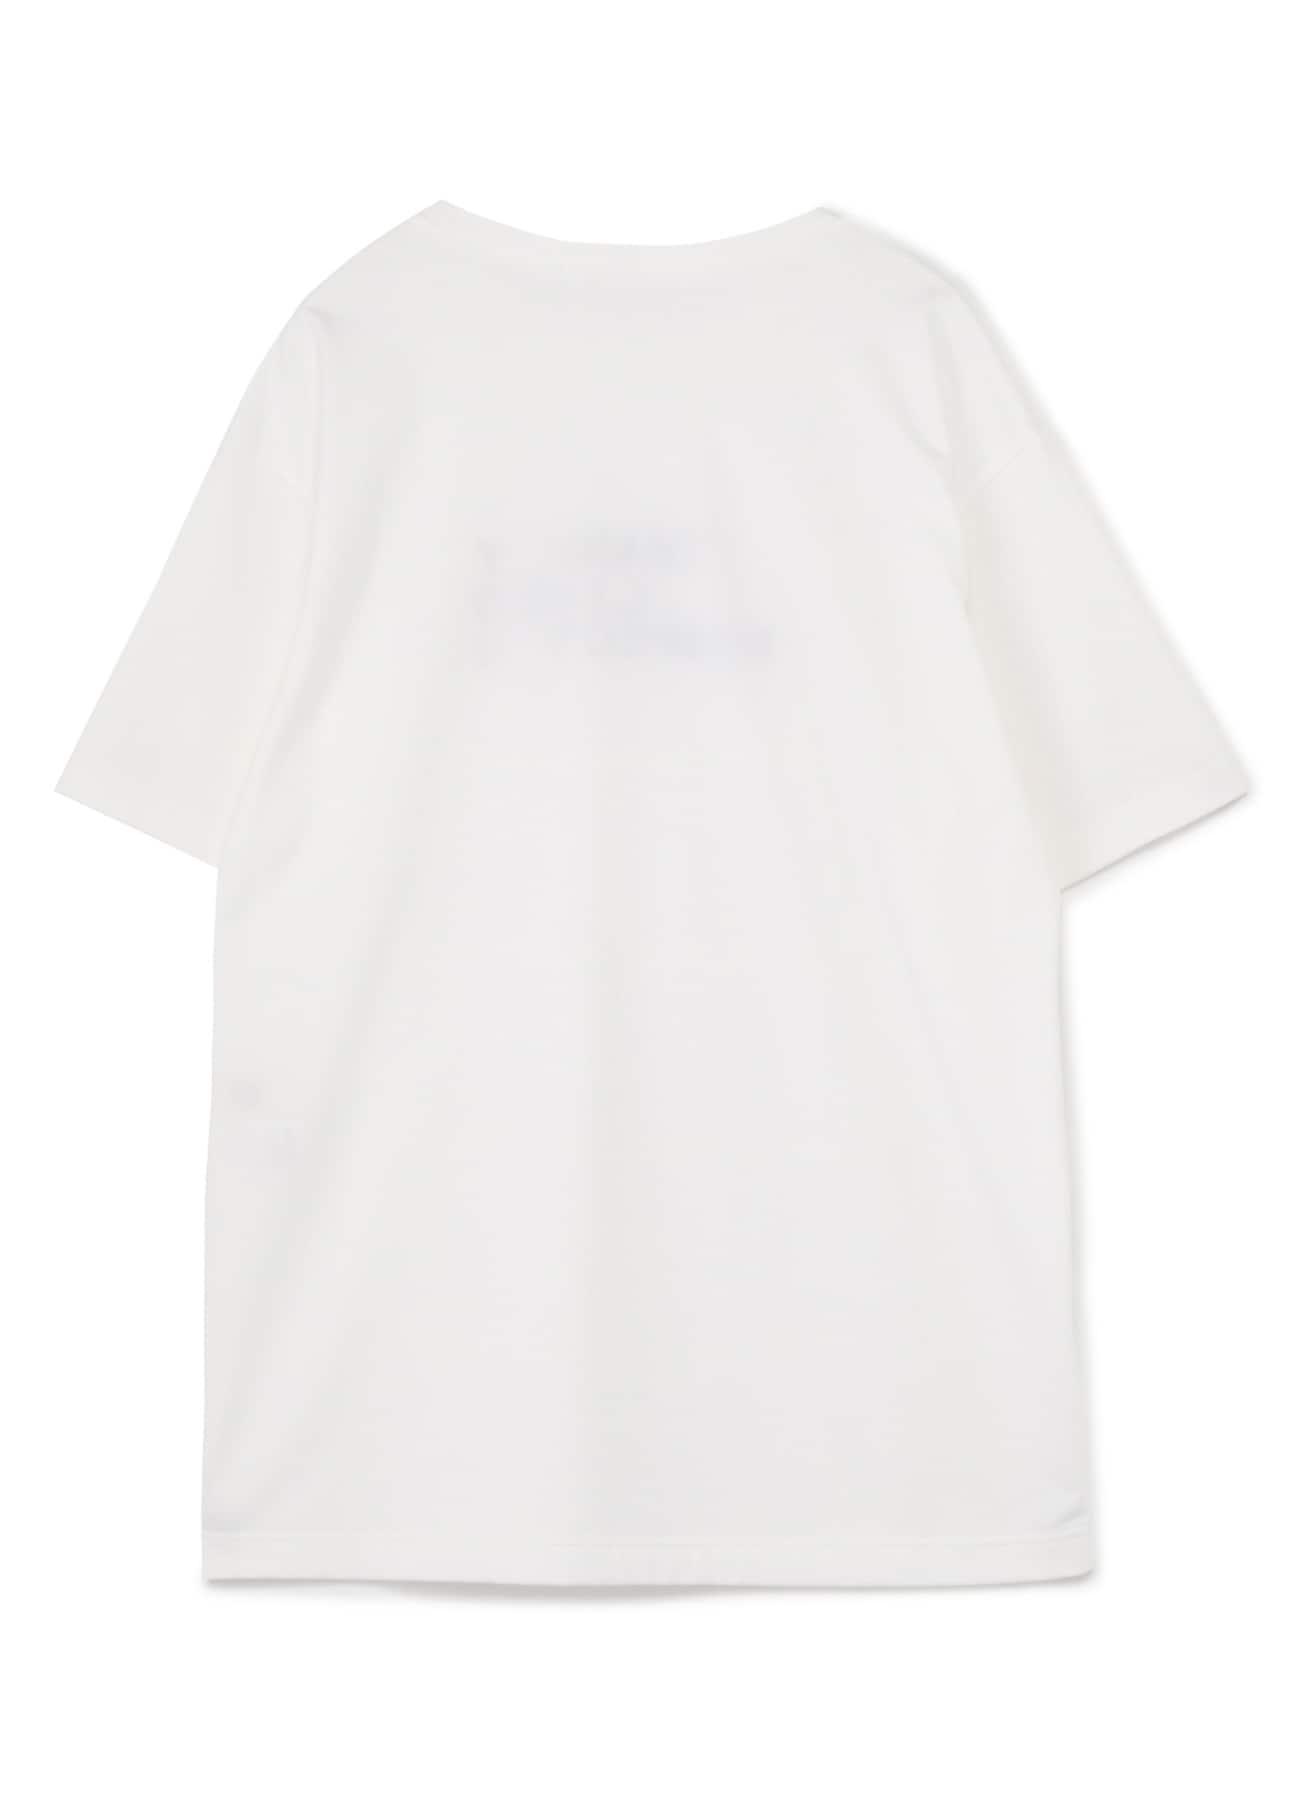 FU*K YOU Embroidery Oversized T-Shirt(S White): Vintage 1.1｜THE 